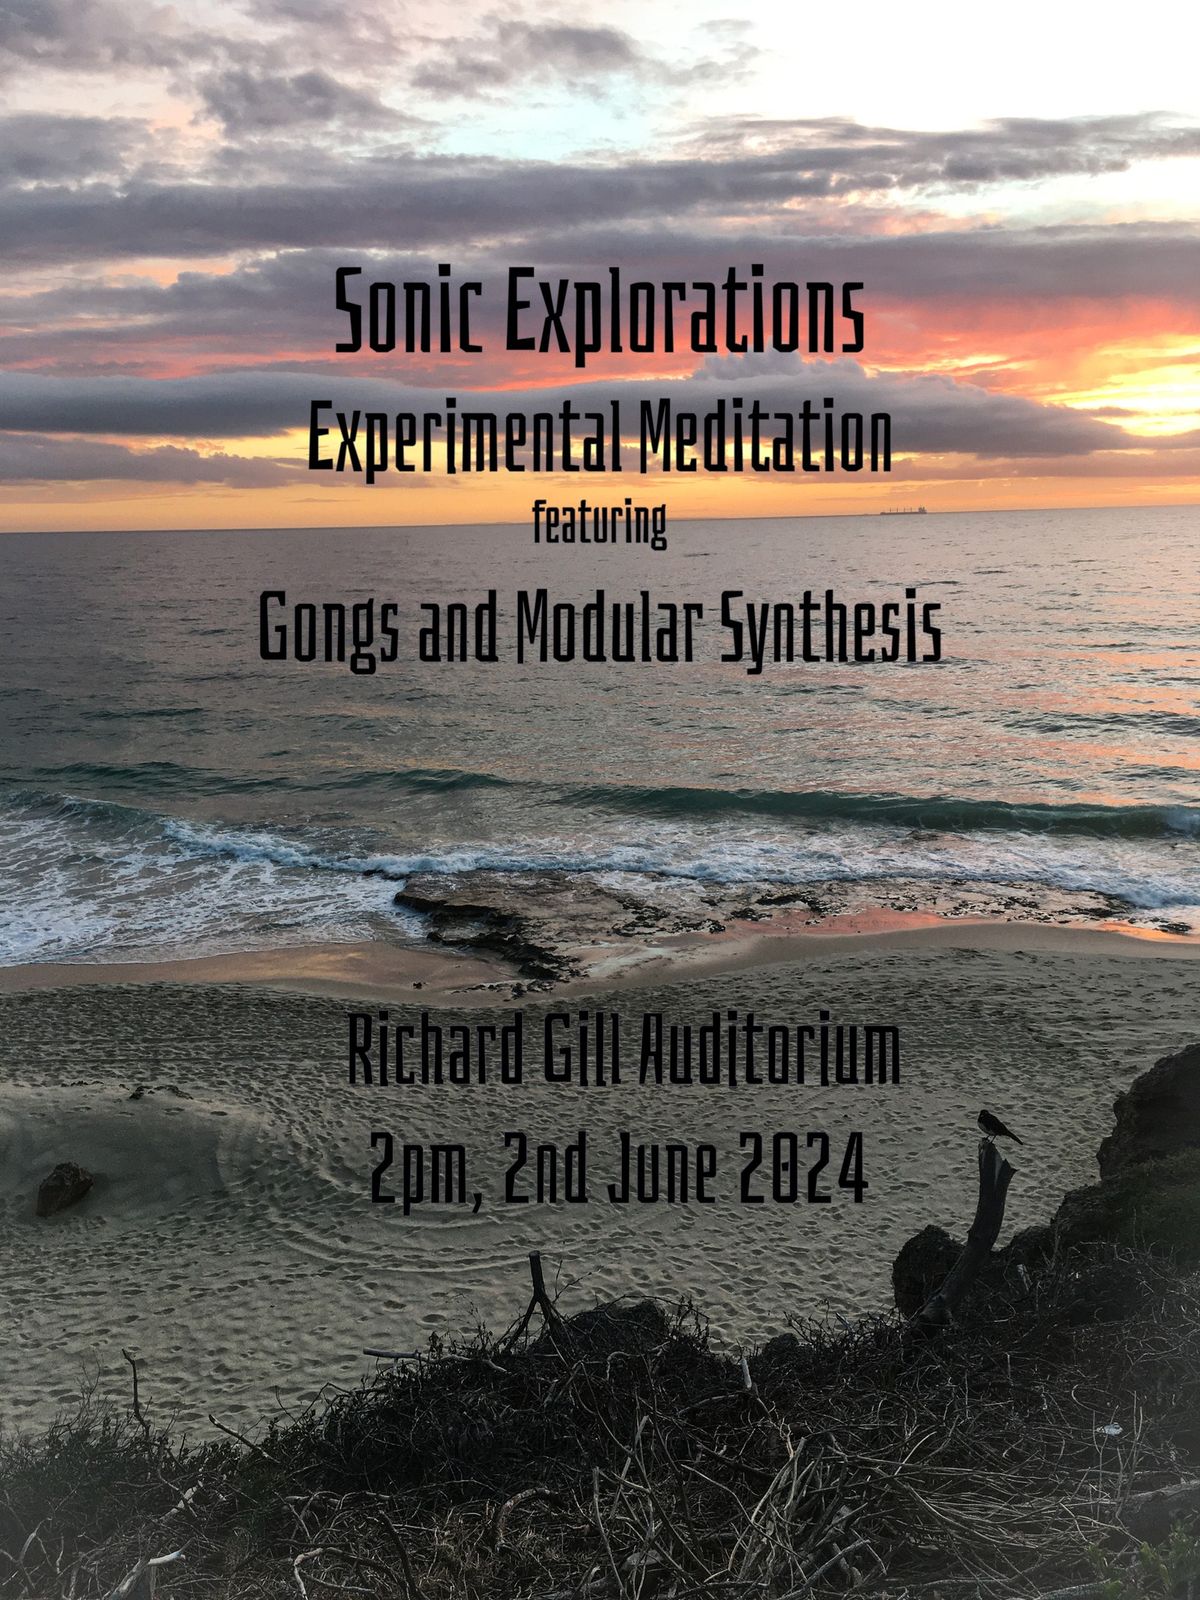 Sonic Explorations in Experimental Meditation featuring Gongs and Modular Synthesis